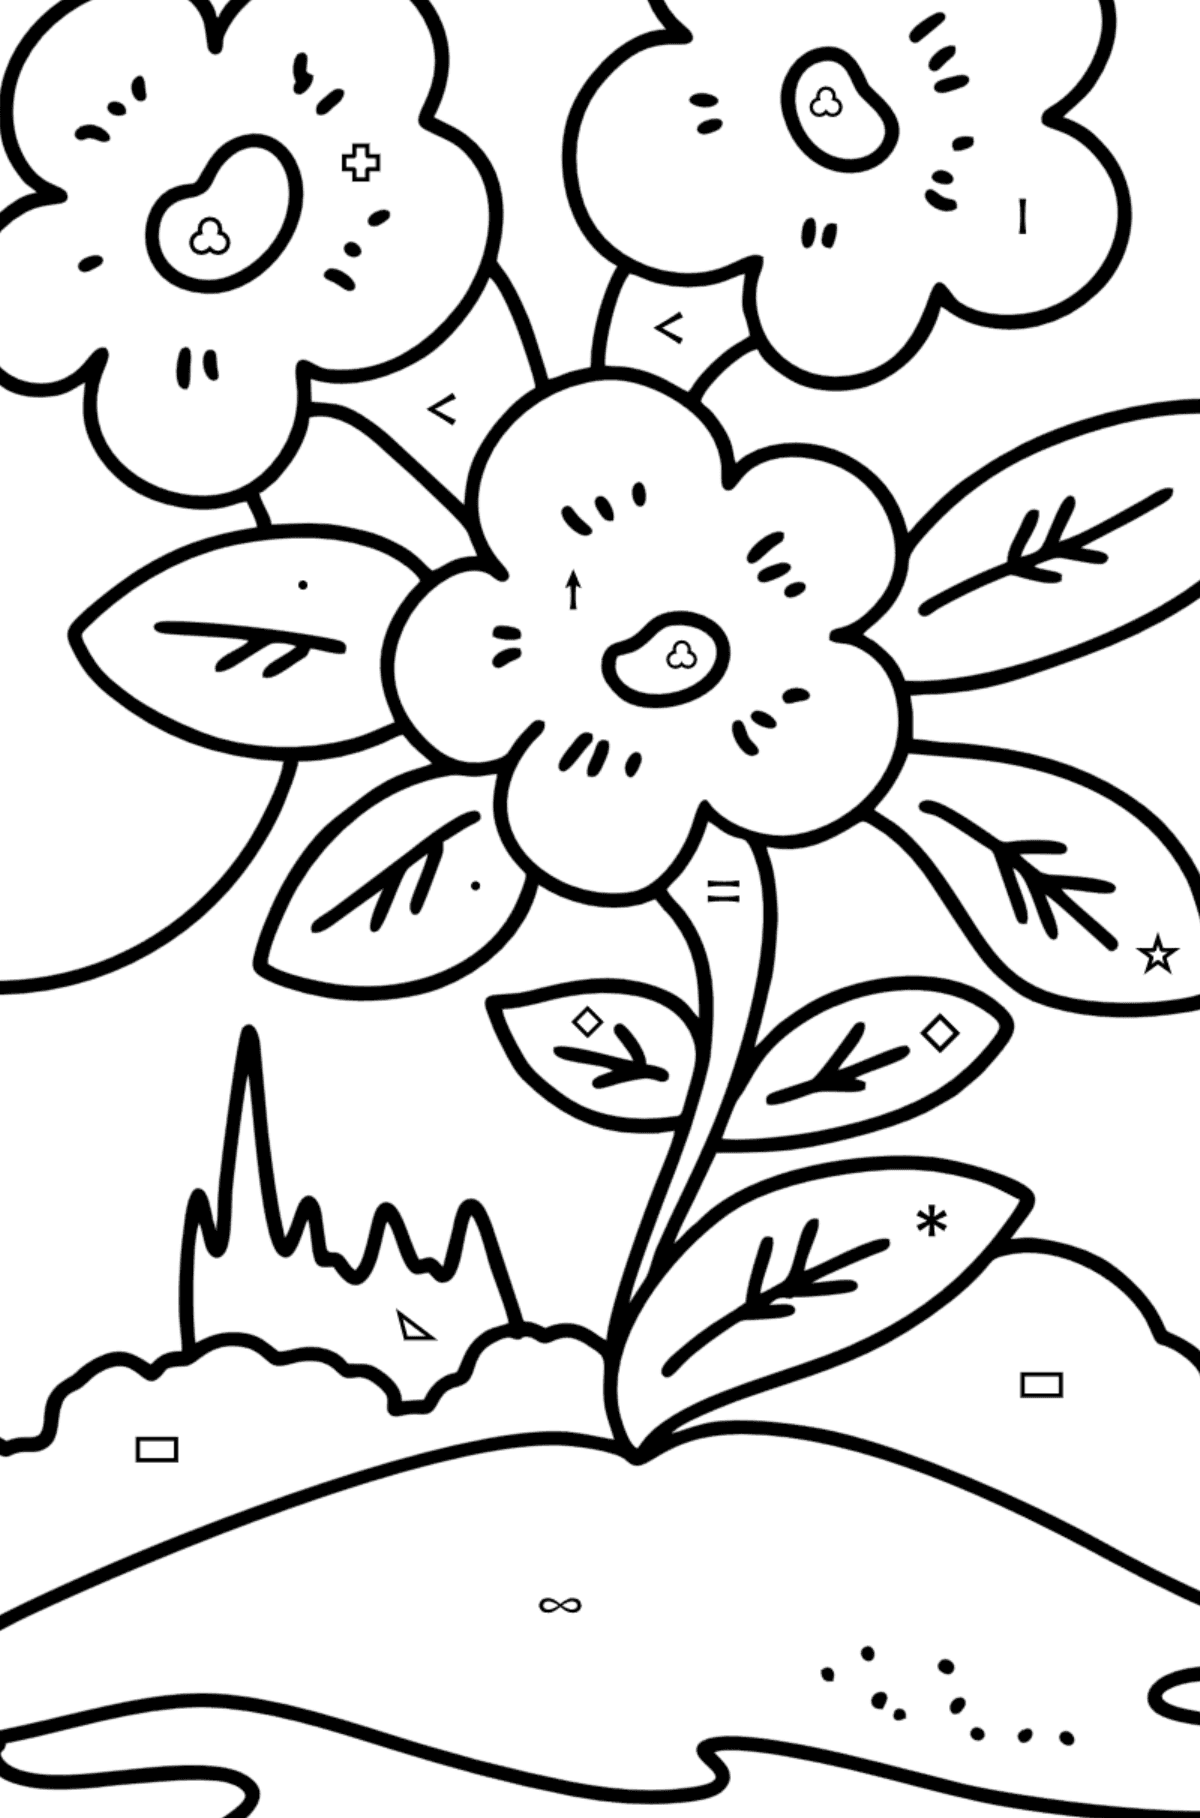 Spring flowers coloring page for Kids - Coloring by Symbols and Geometric Shapes for Kids